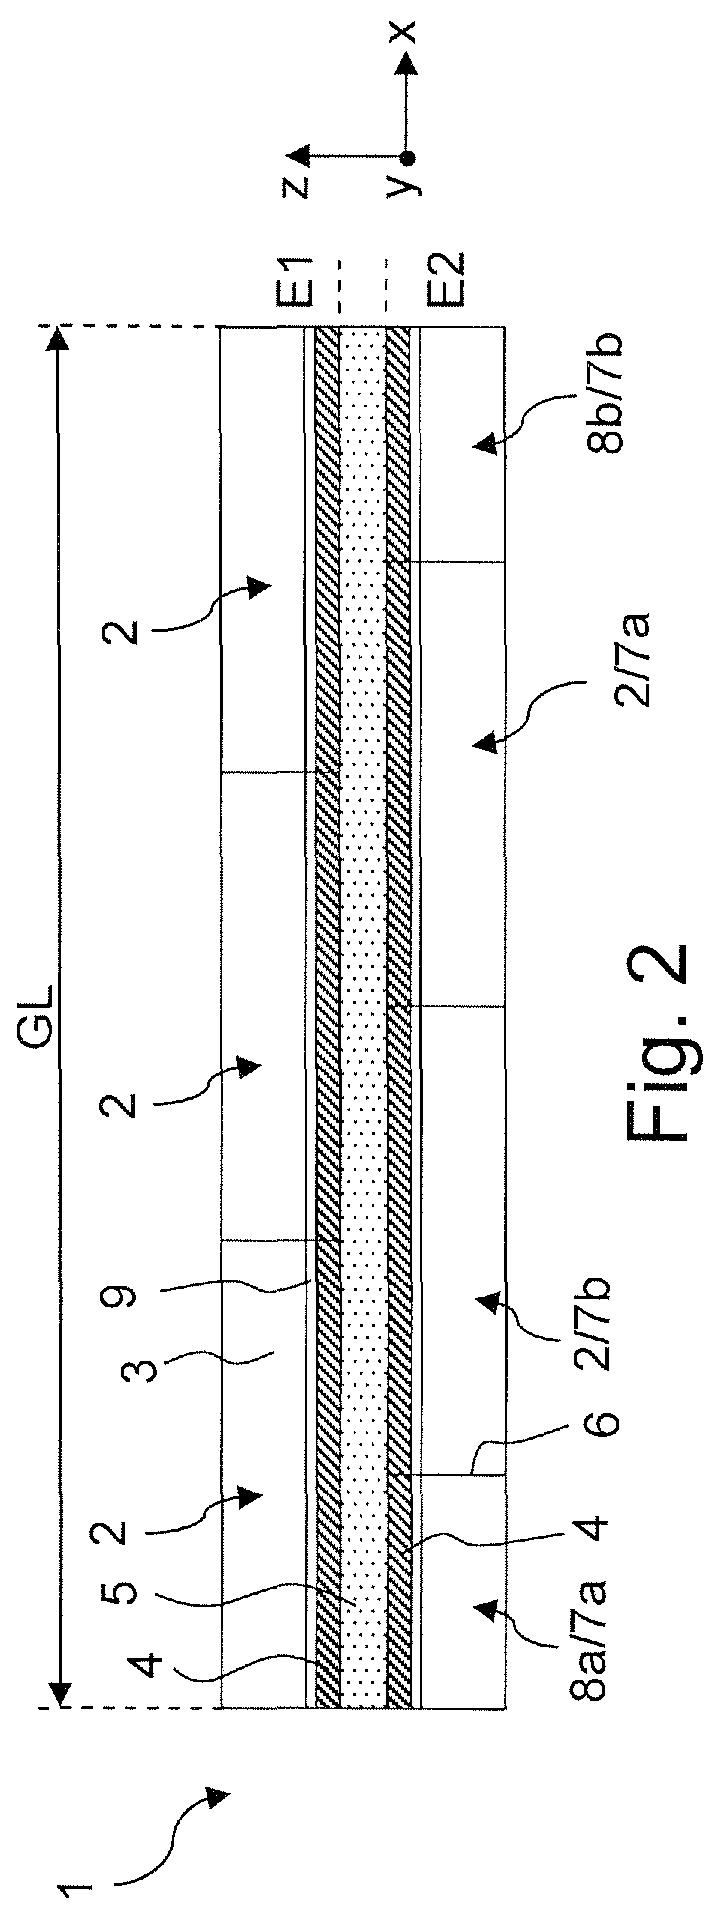 NMR spectrometer comprising a superconducting magnetic coil having windings composed of a superconductor structure having strip pieces chained together